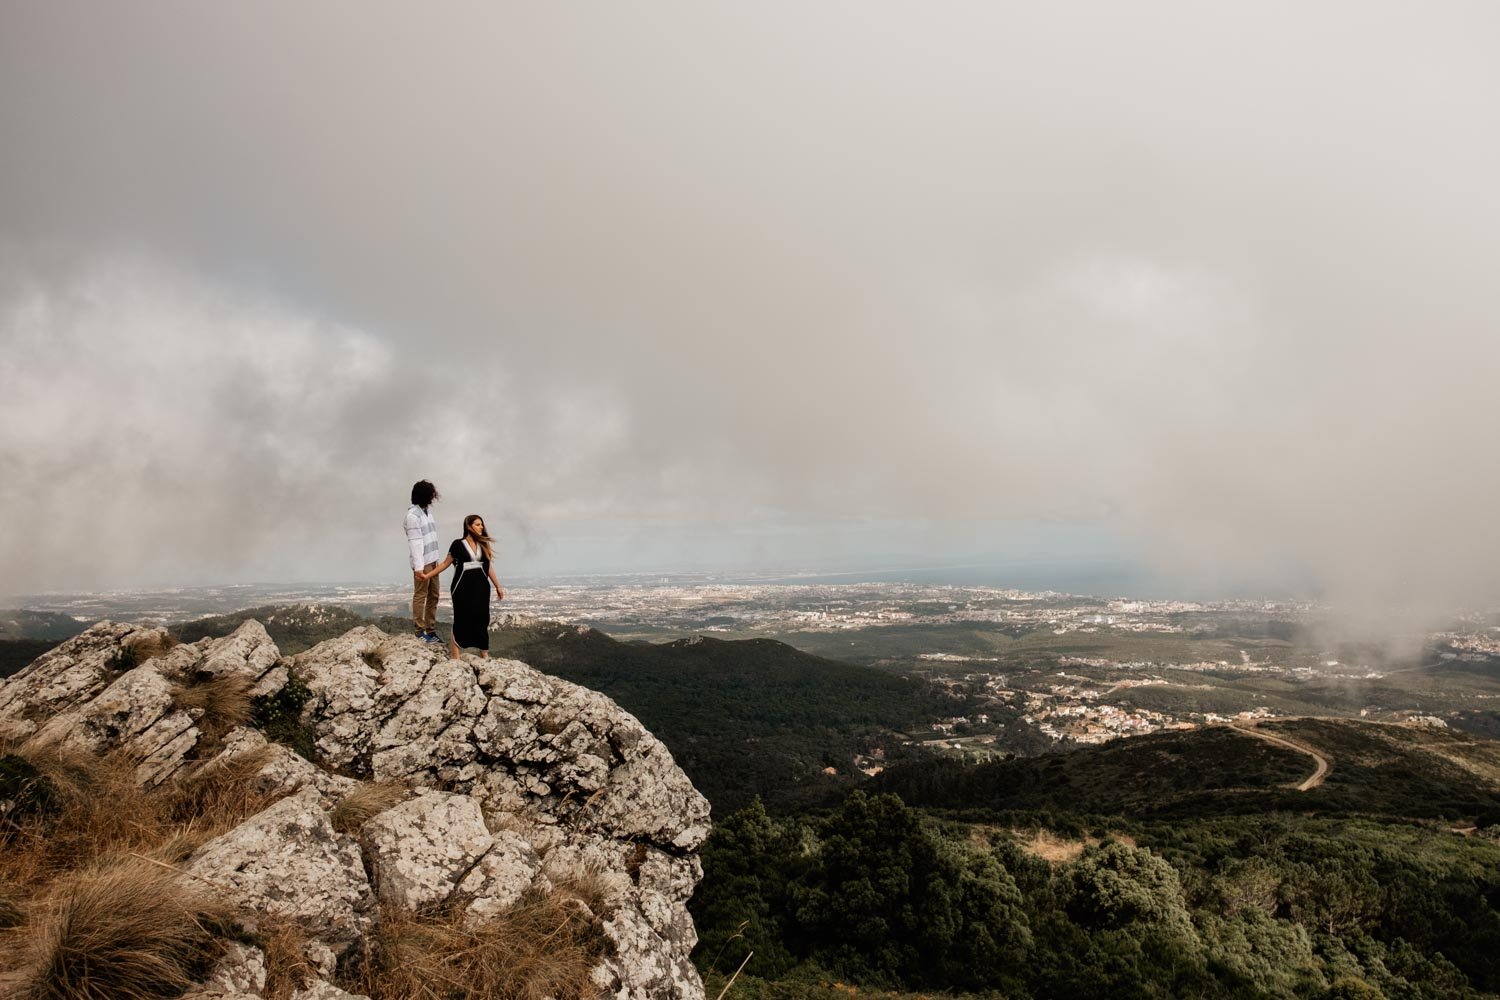 dc baltimore philly destination wedding photographer mountain top engagement session by barbara o photography-32.jpg